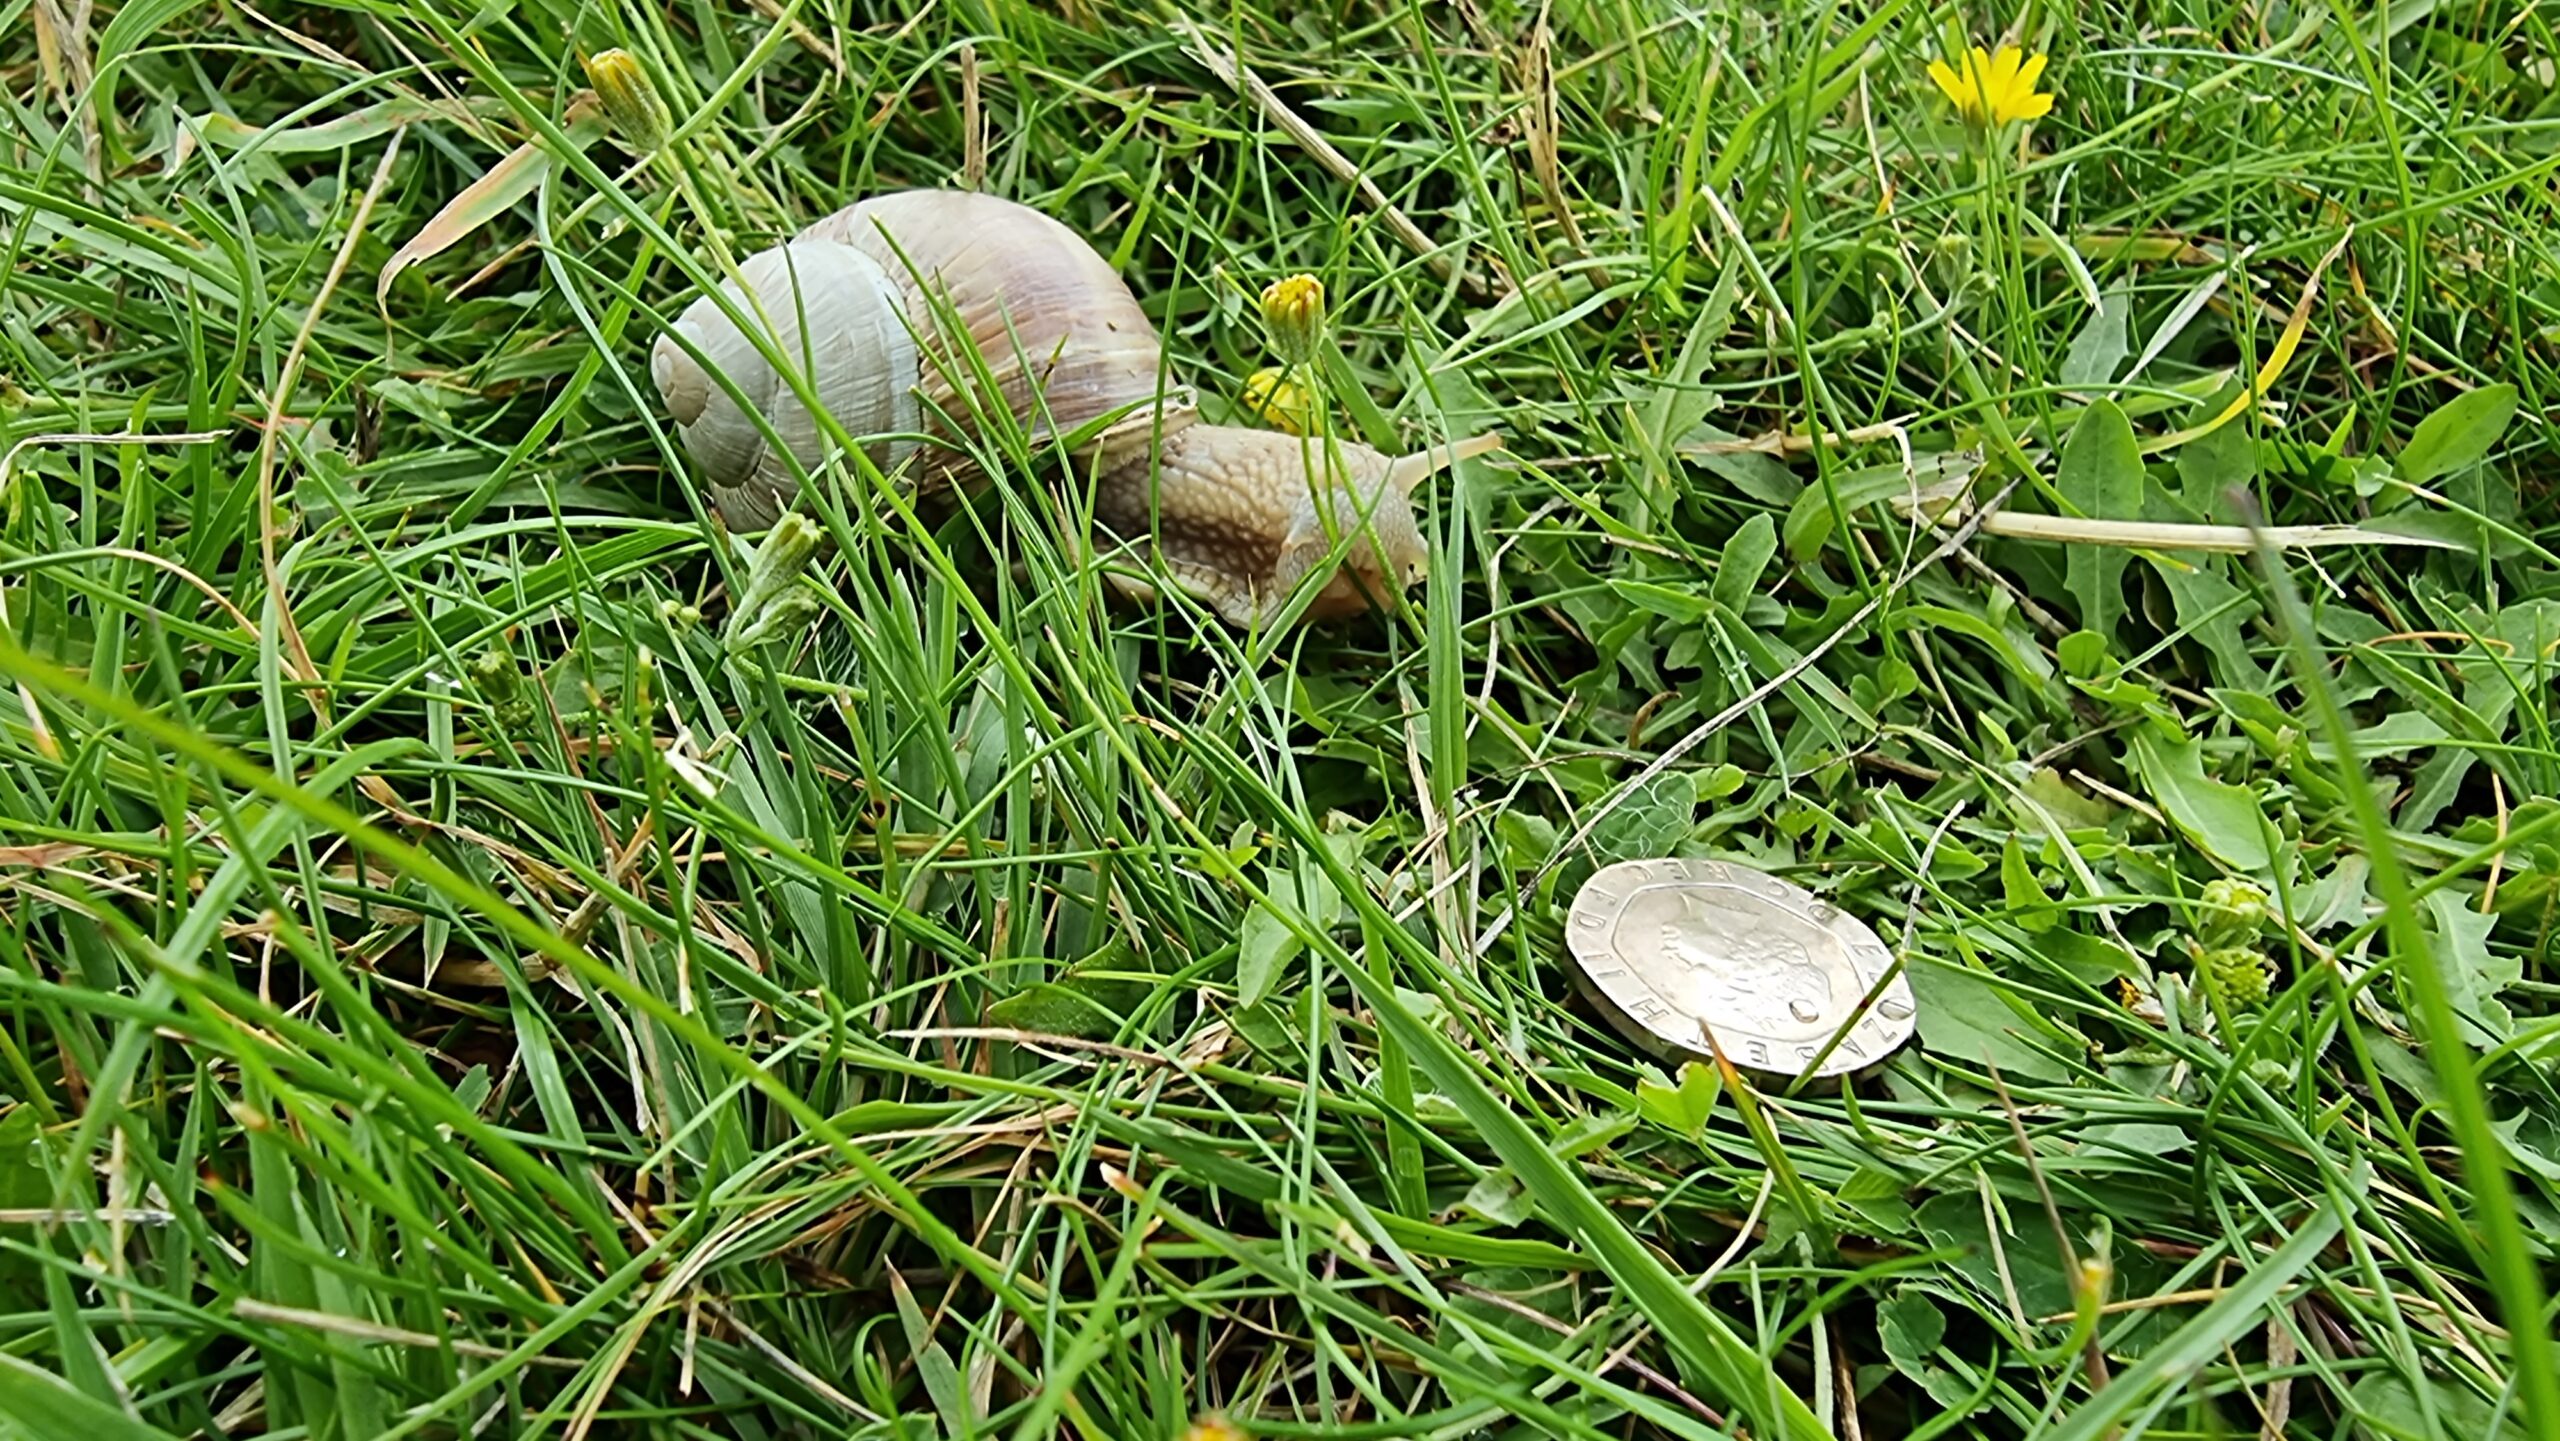 Large cream-coloured snail in moderately-long grass, alongside a twenty-pence piece (for scale). The snail is around three times as long as the coin is.